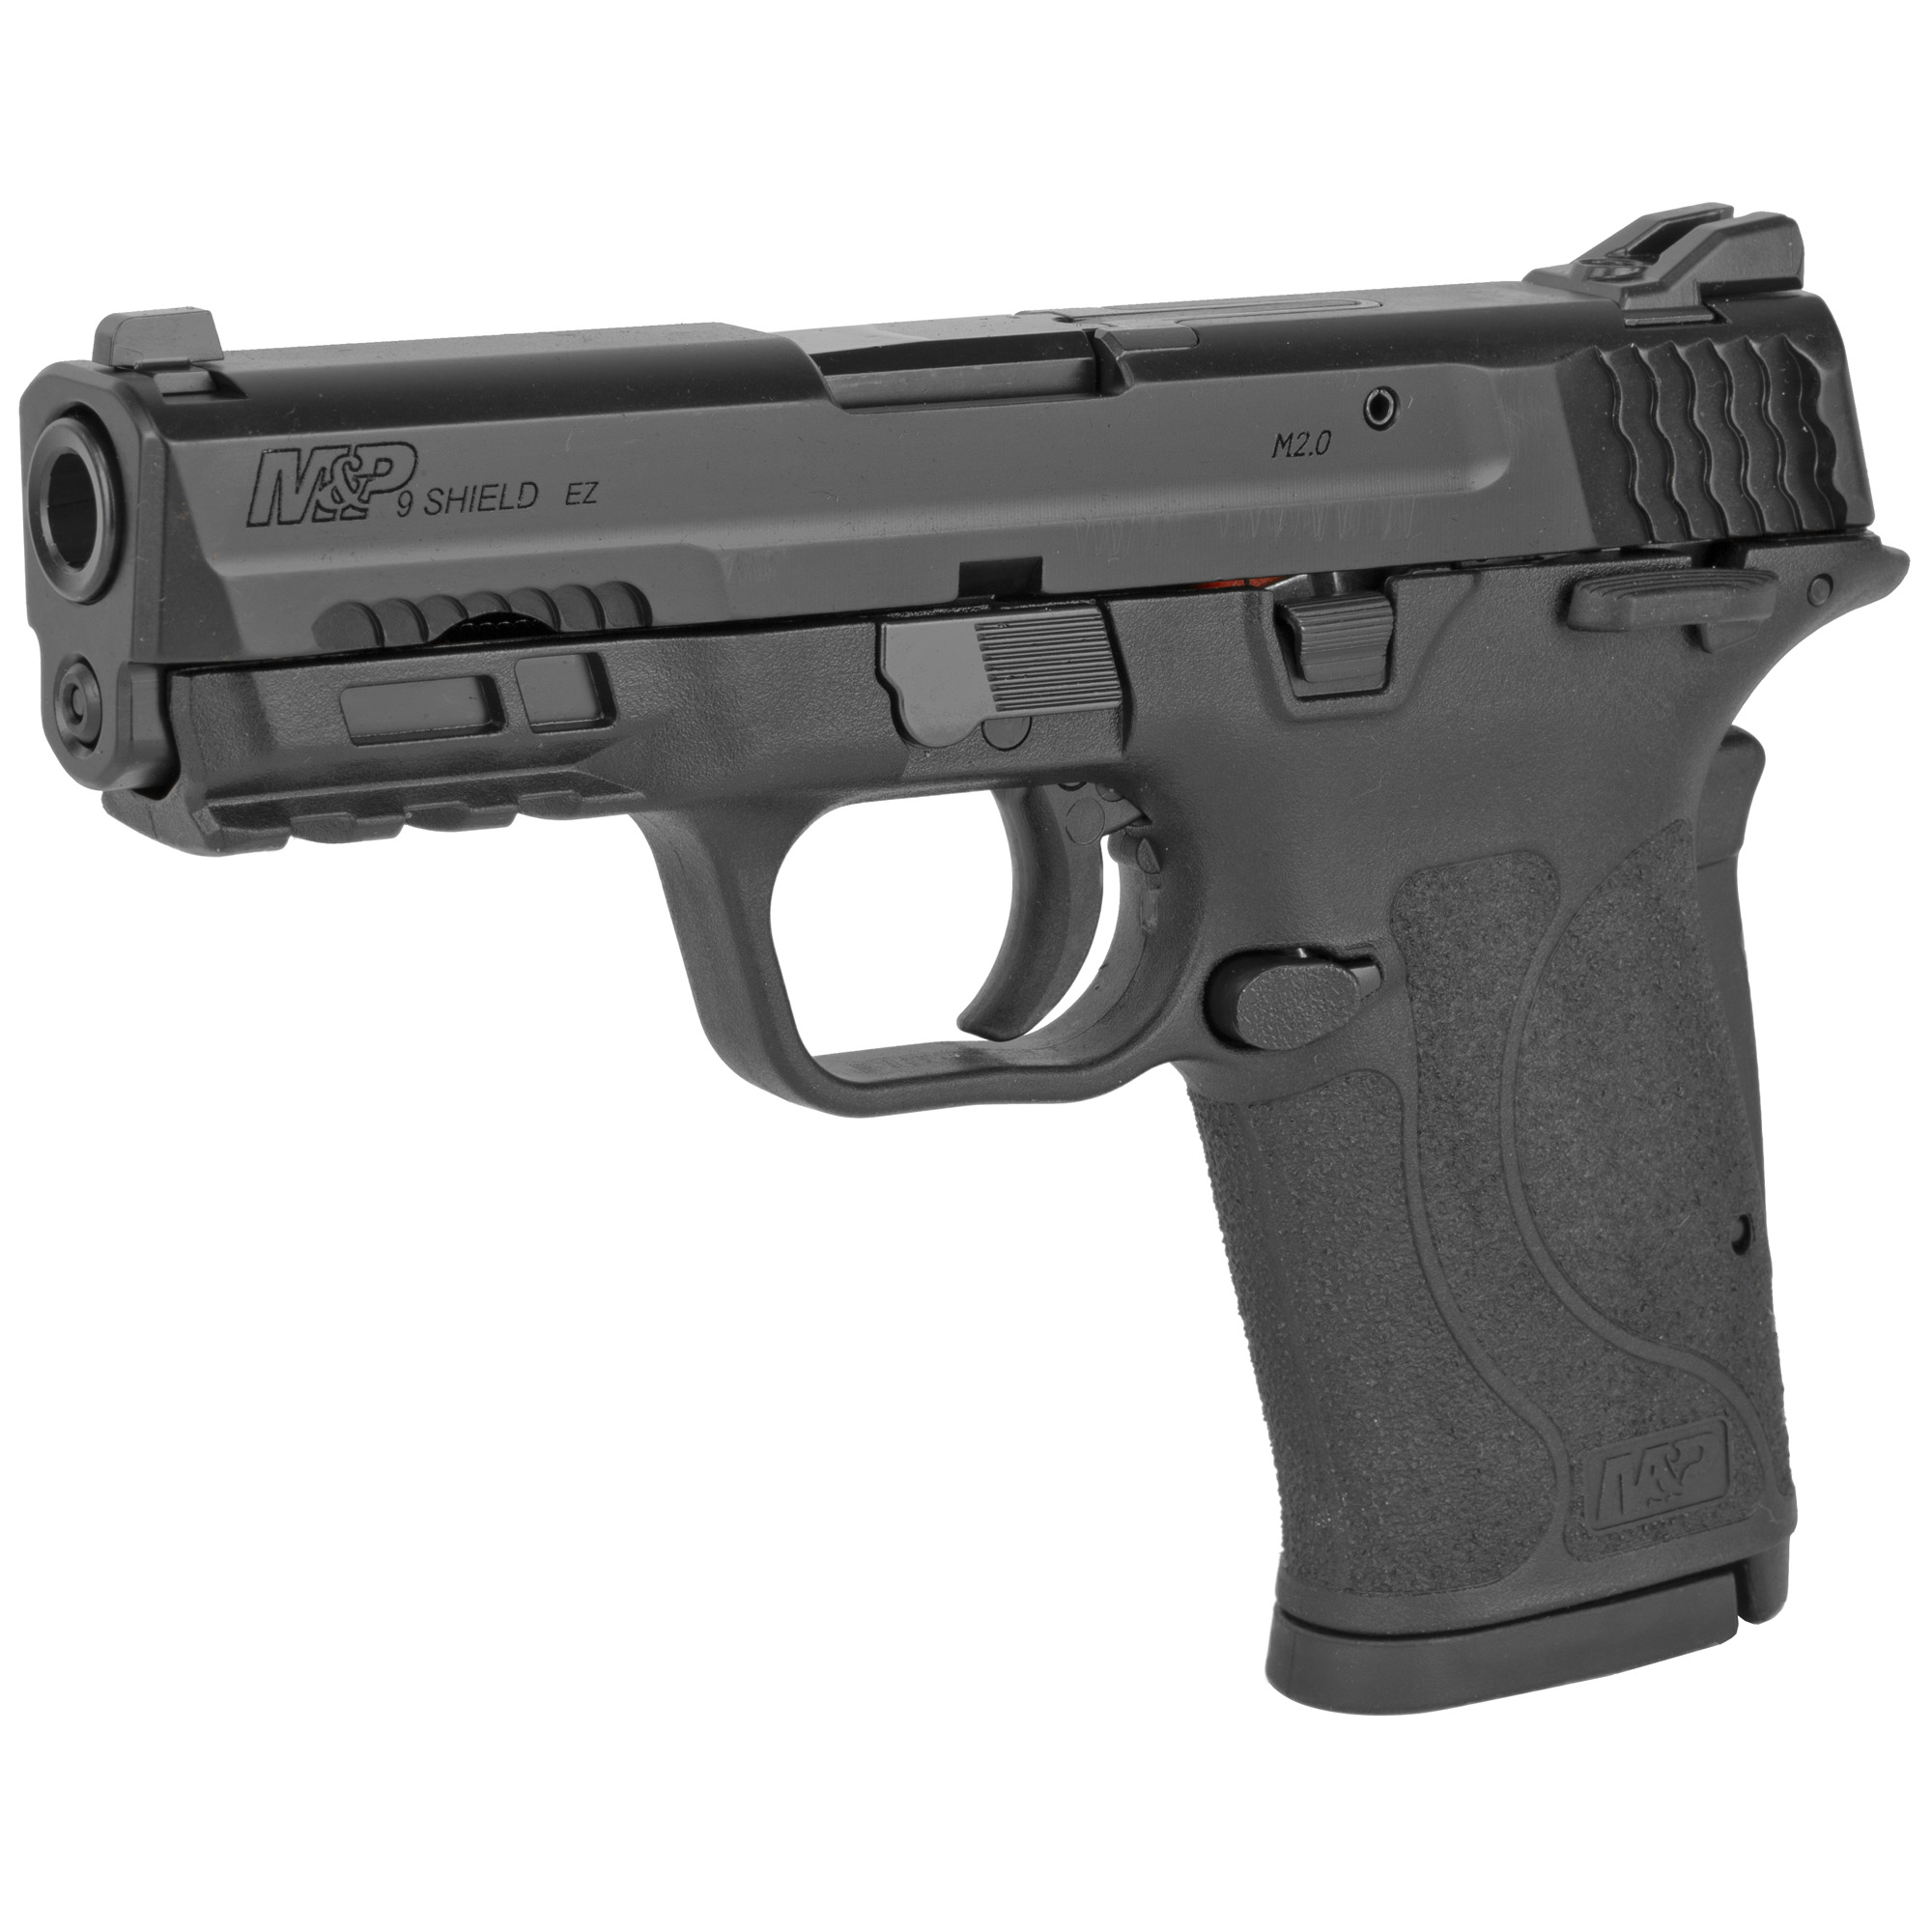 S&W SHIELD M2.0 M&P 9MM EZ BLACKENED SS/BLK THUMB SAFETY - for sale